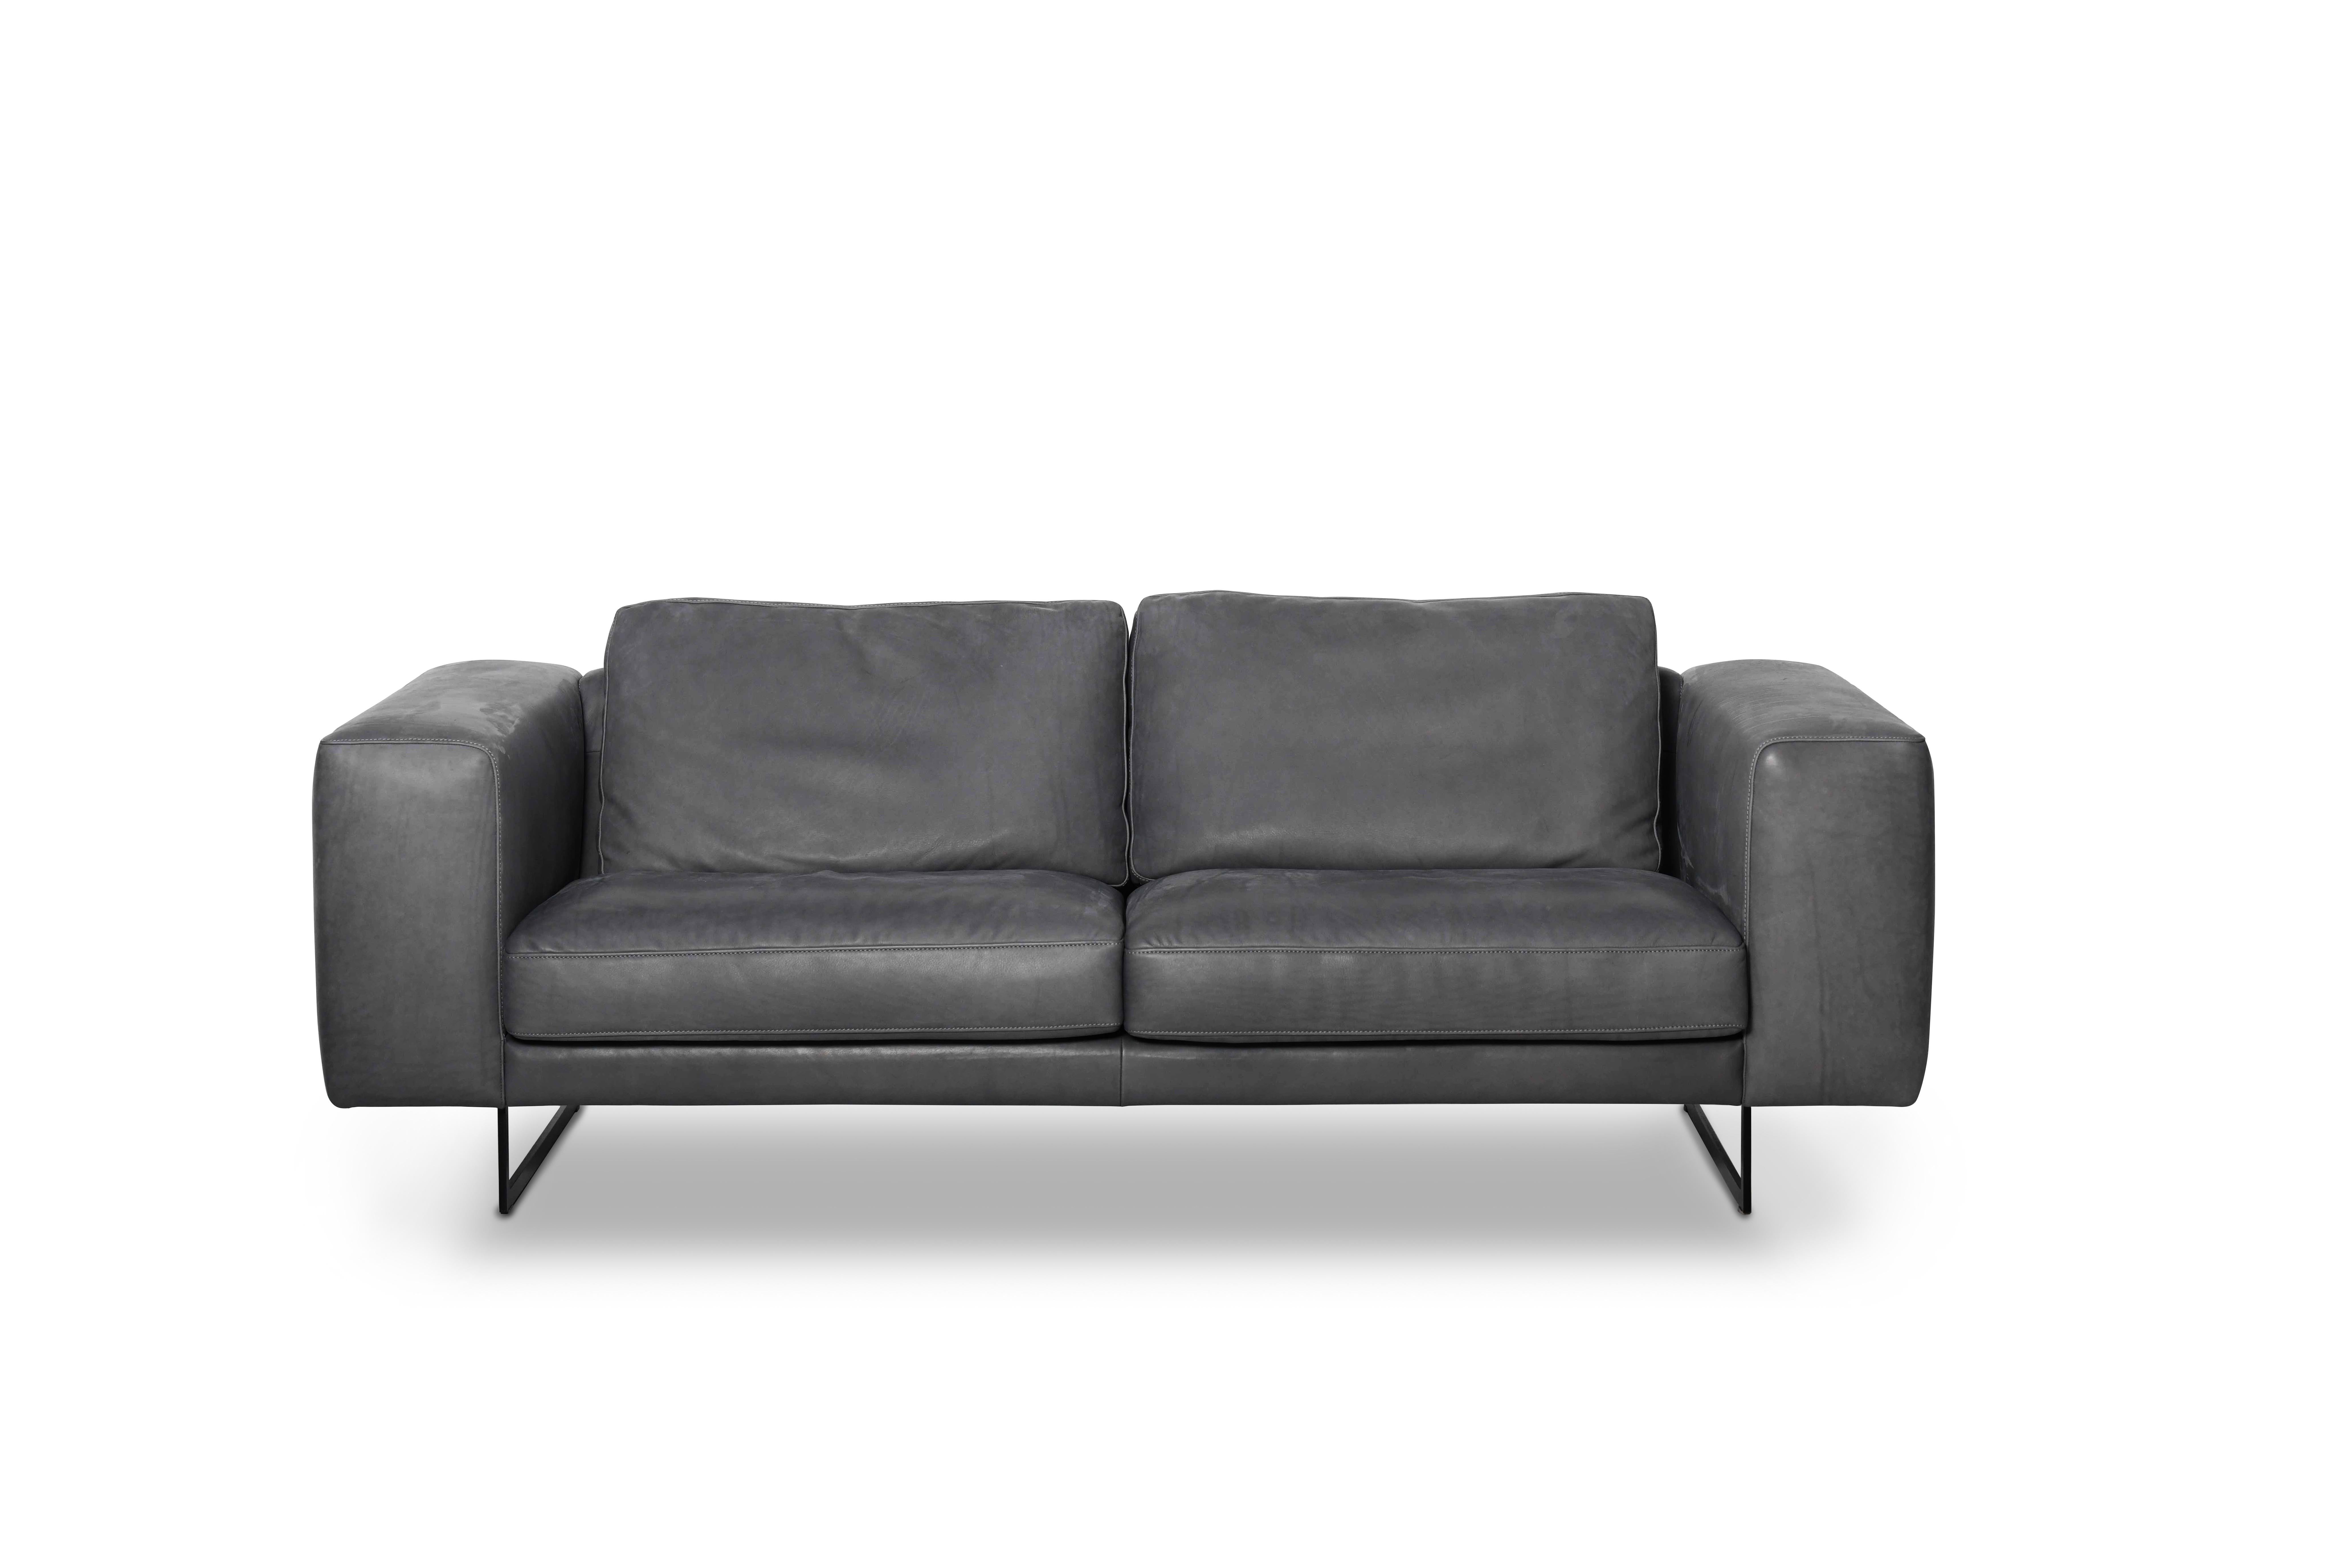 DS-748 sofa by De Sede
Dimensions: D 95 x W 208 x H 76 cm
Materials: Sofa seat frame: steel profile. Back and side sections made of panel materials. Recamier and corner
element: solid beech and panel materials. Seat: leather

Prices may change